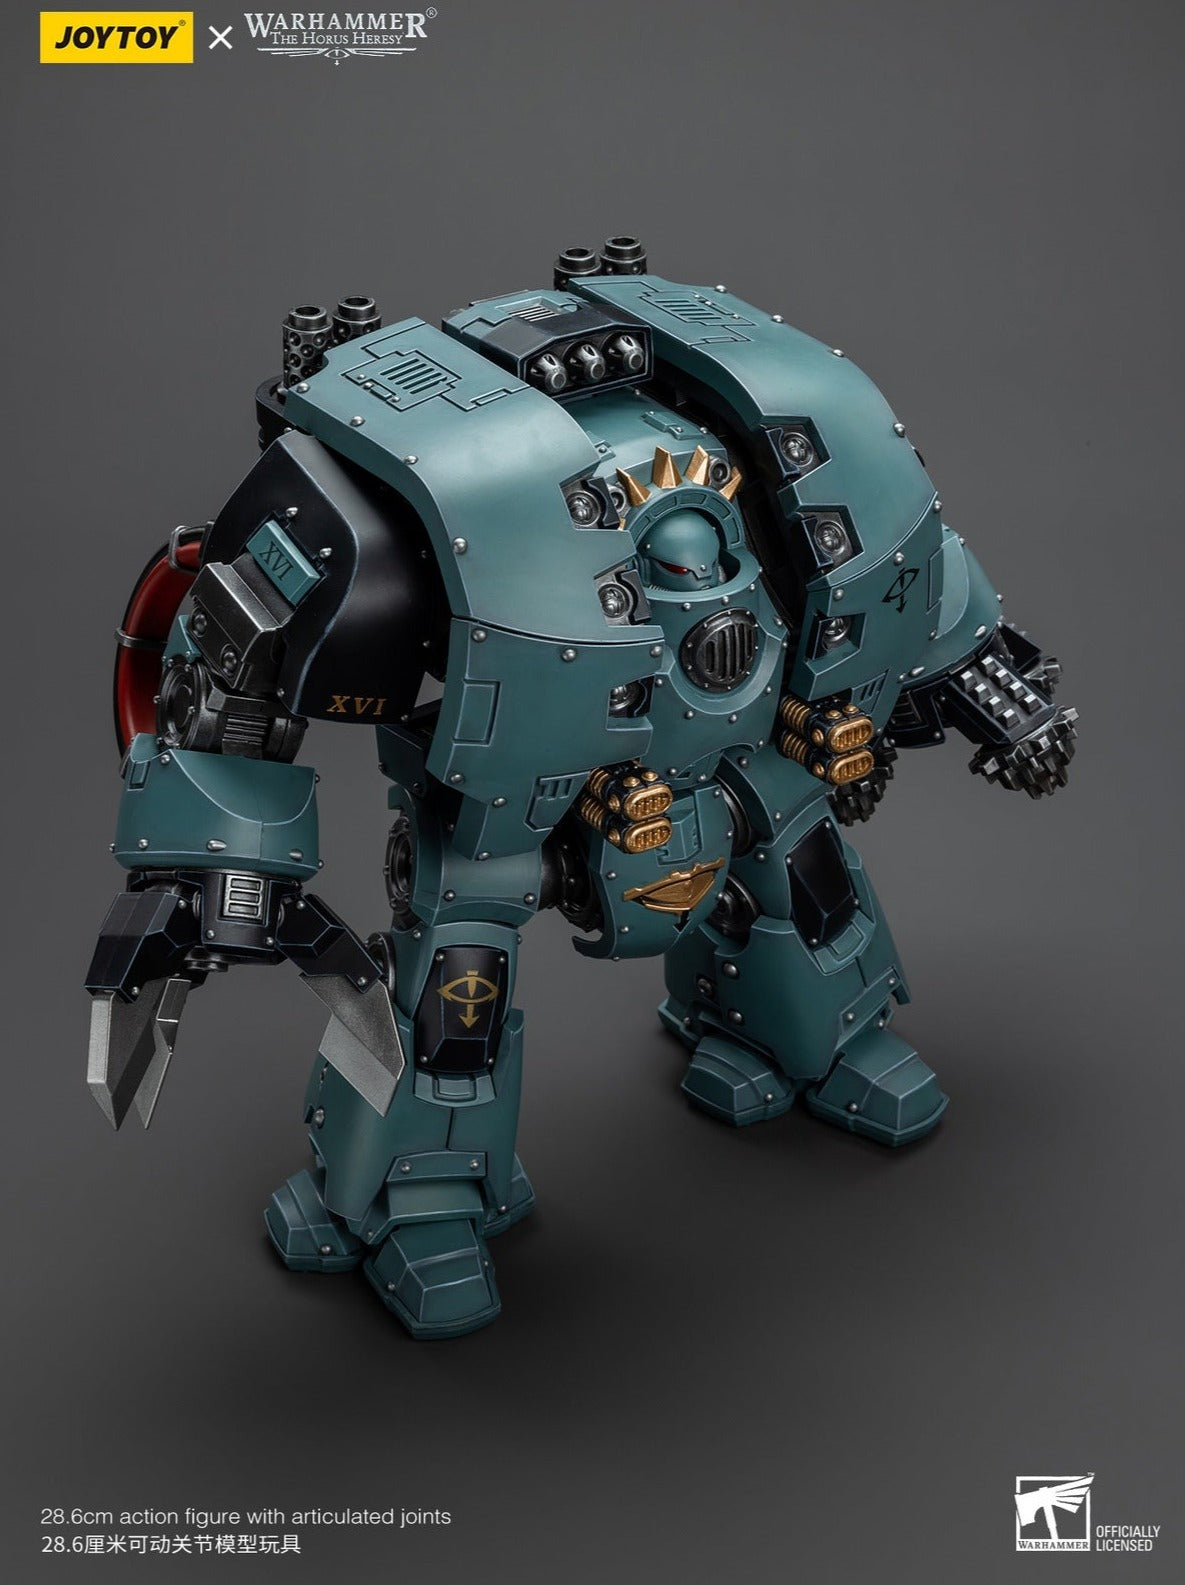 Warhammer The Horus Heresy: Sons of Horus Leviathan Dreadnought with Siege Drills: Joy Toy